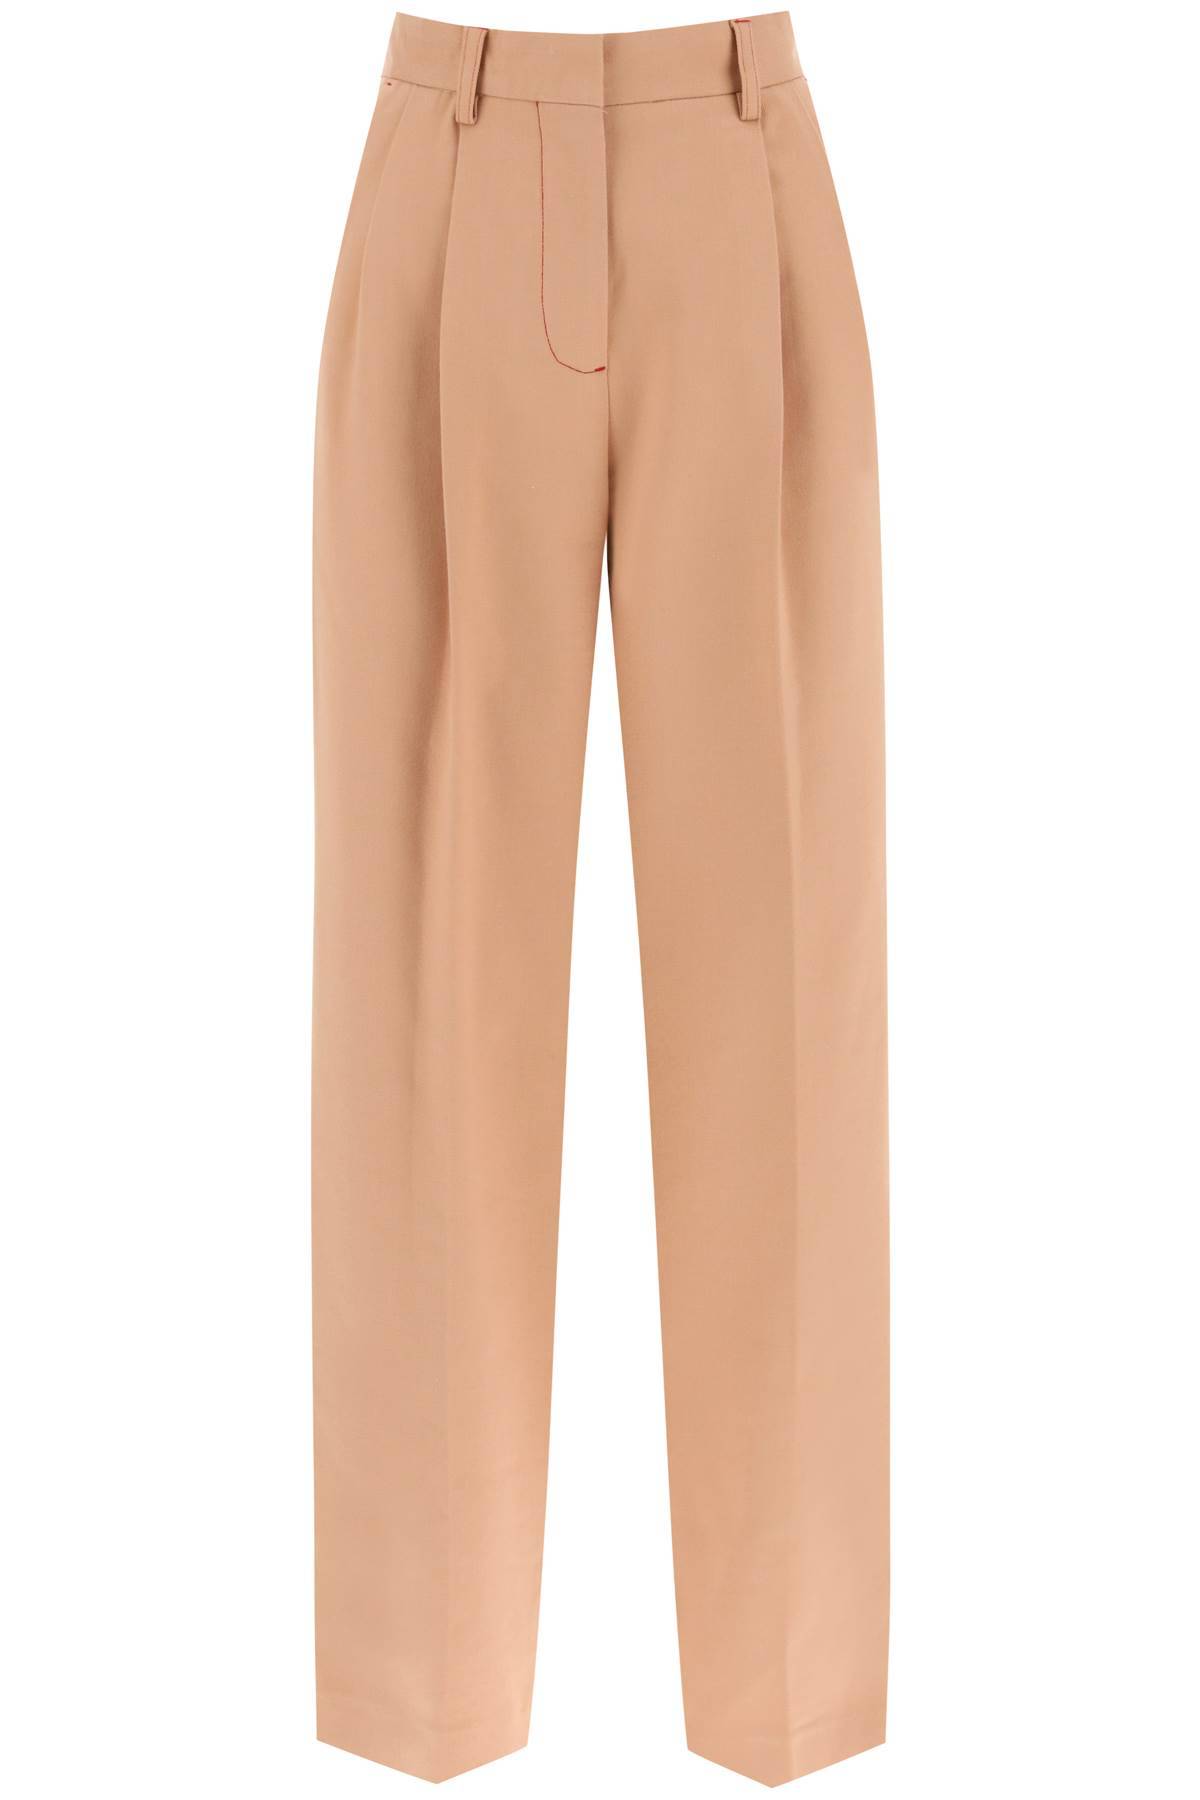 See By Chloé SEE BY CHLOE cotton twill pants